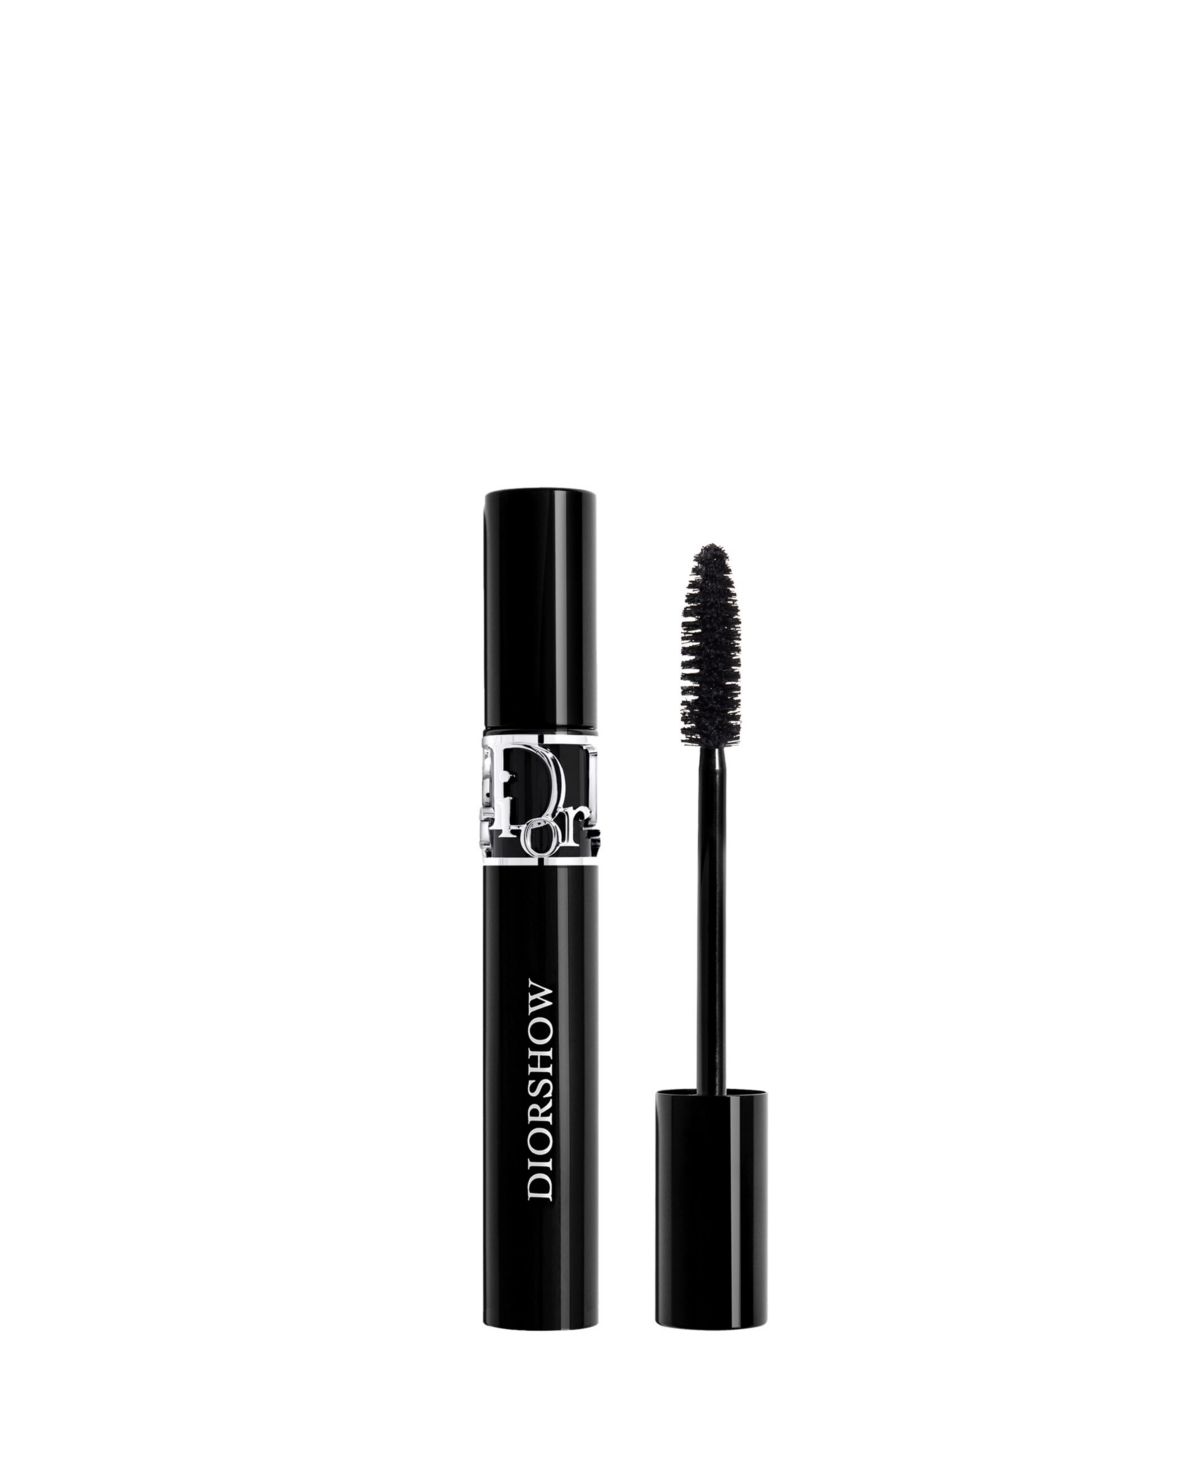 Dior Show 24h Buildable Volume Mascara In Black (a Timeless Black)